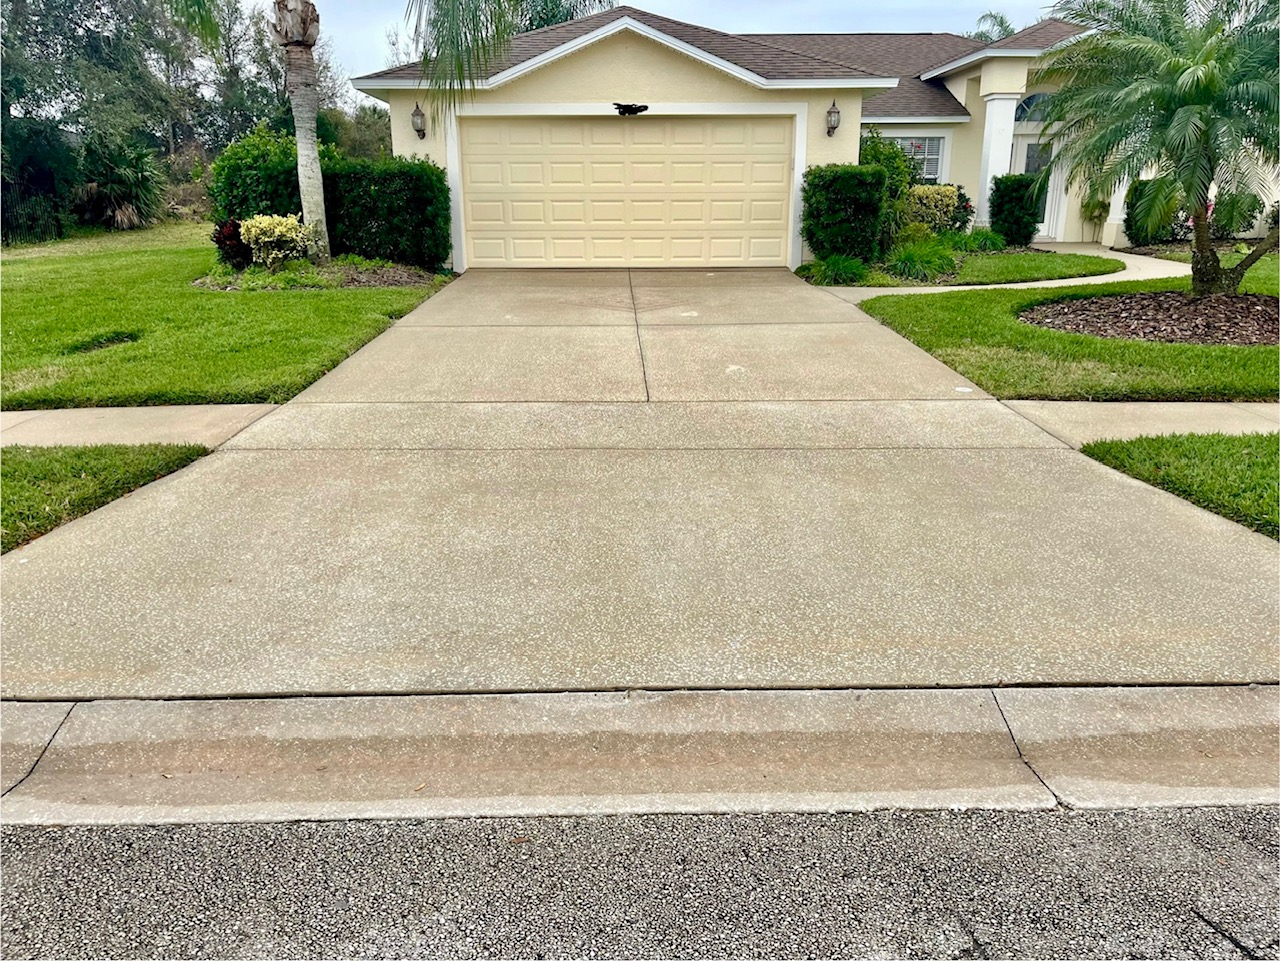 Driveway Washing Project Completed In Port Orange, Florida